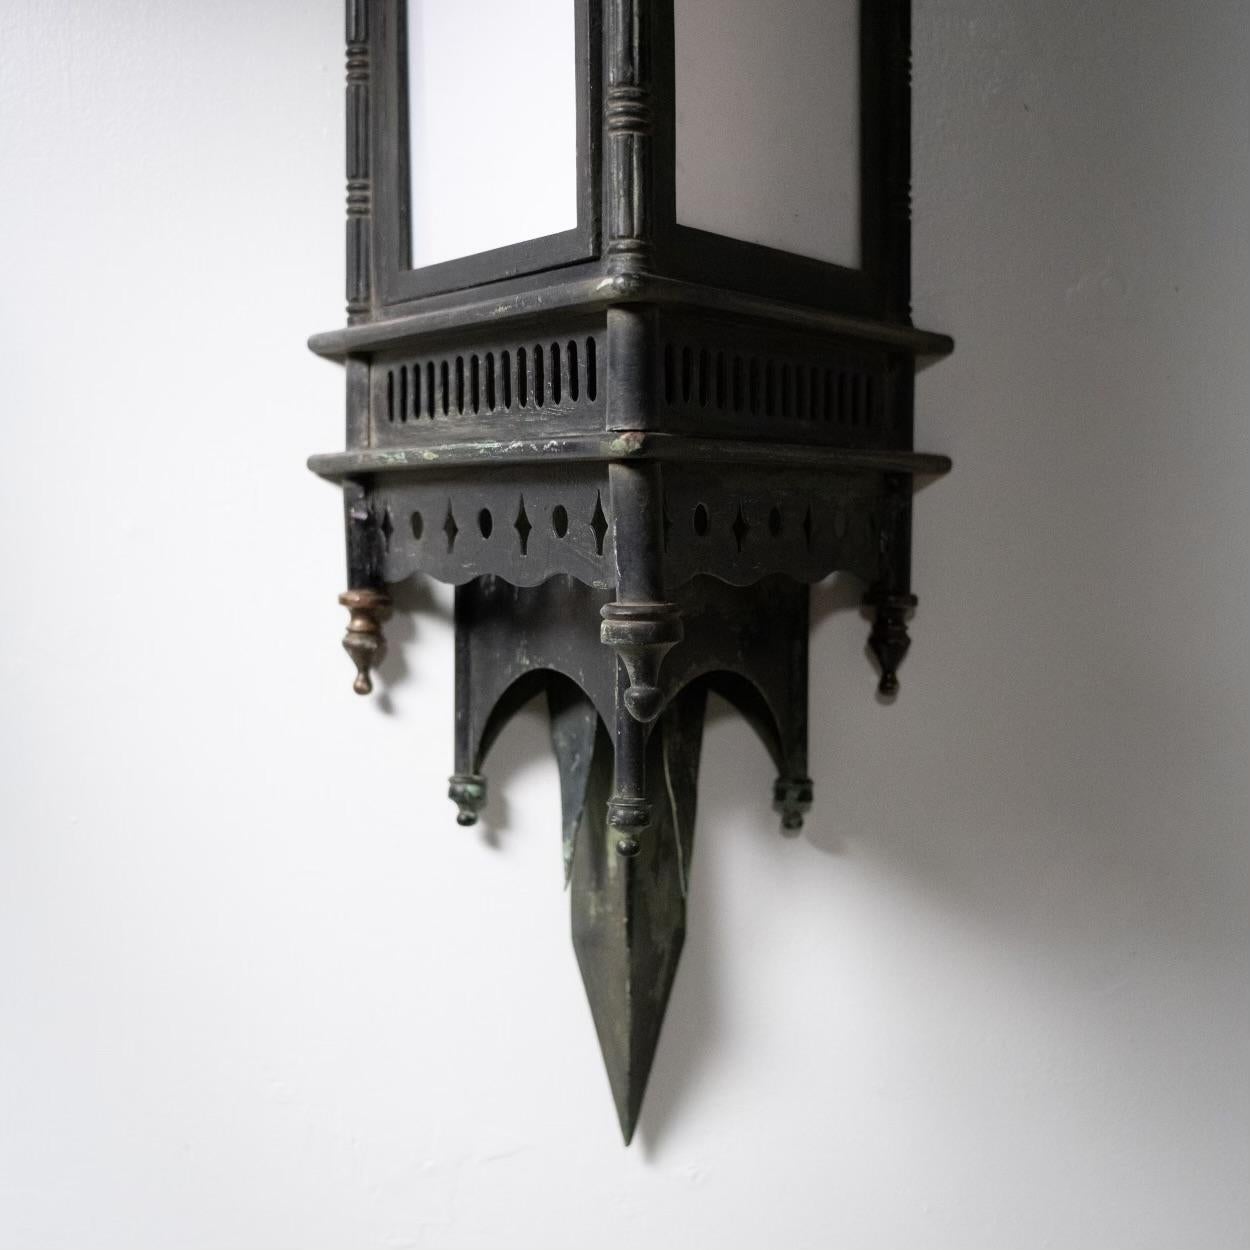 Bronze & Copper exterior sconces pair from the original YWCA Building on Nicollet Ave. Downtown Minneapolis. 
Built in 1929 and demolished in 1947 these sconces then found themselves used as entrance lights for a private residence until recently.  